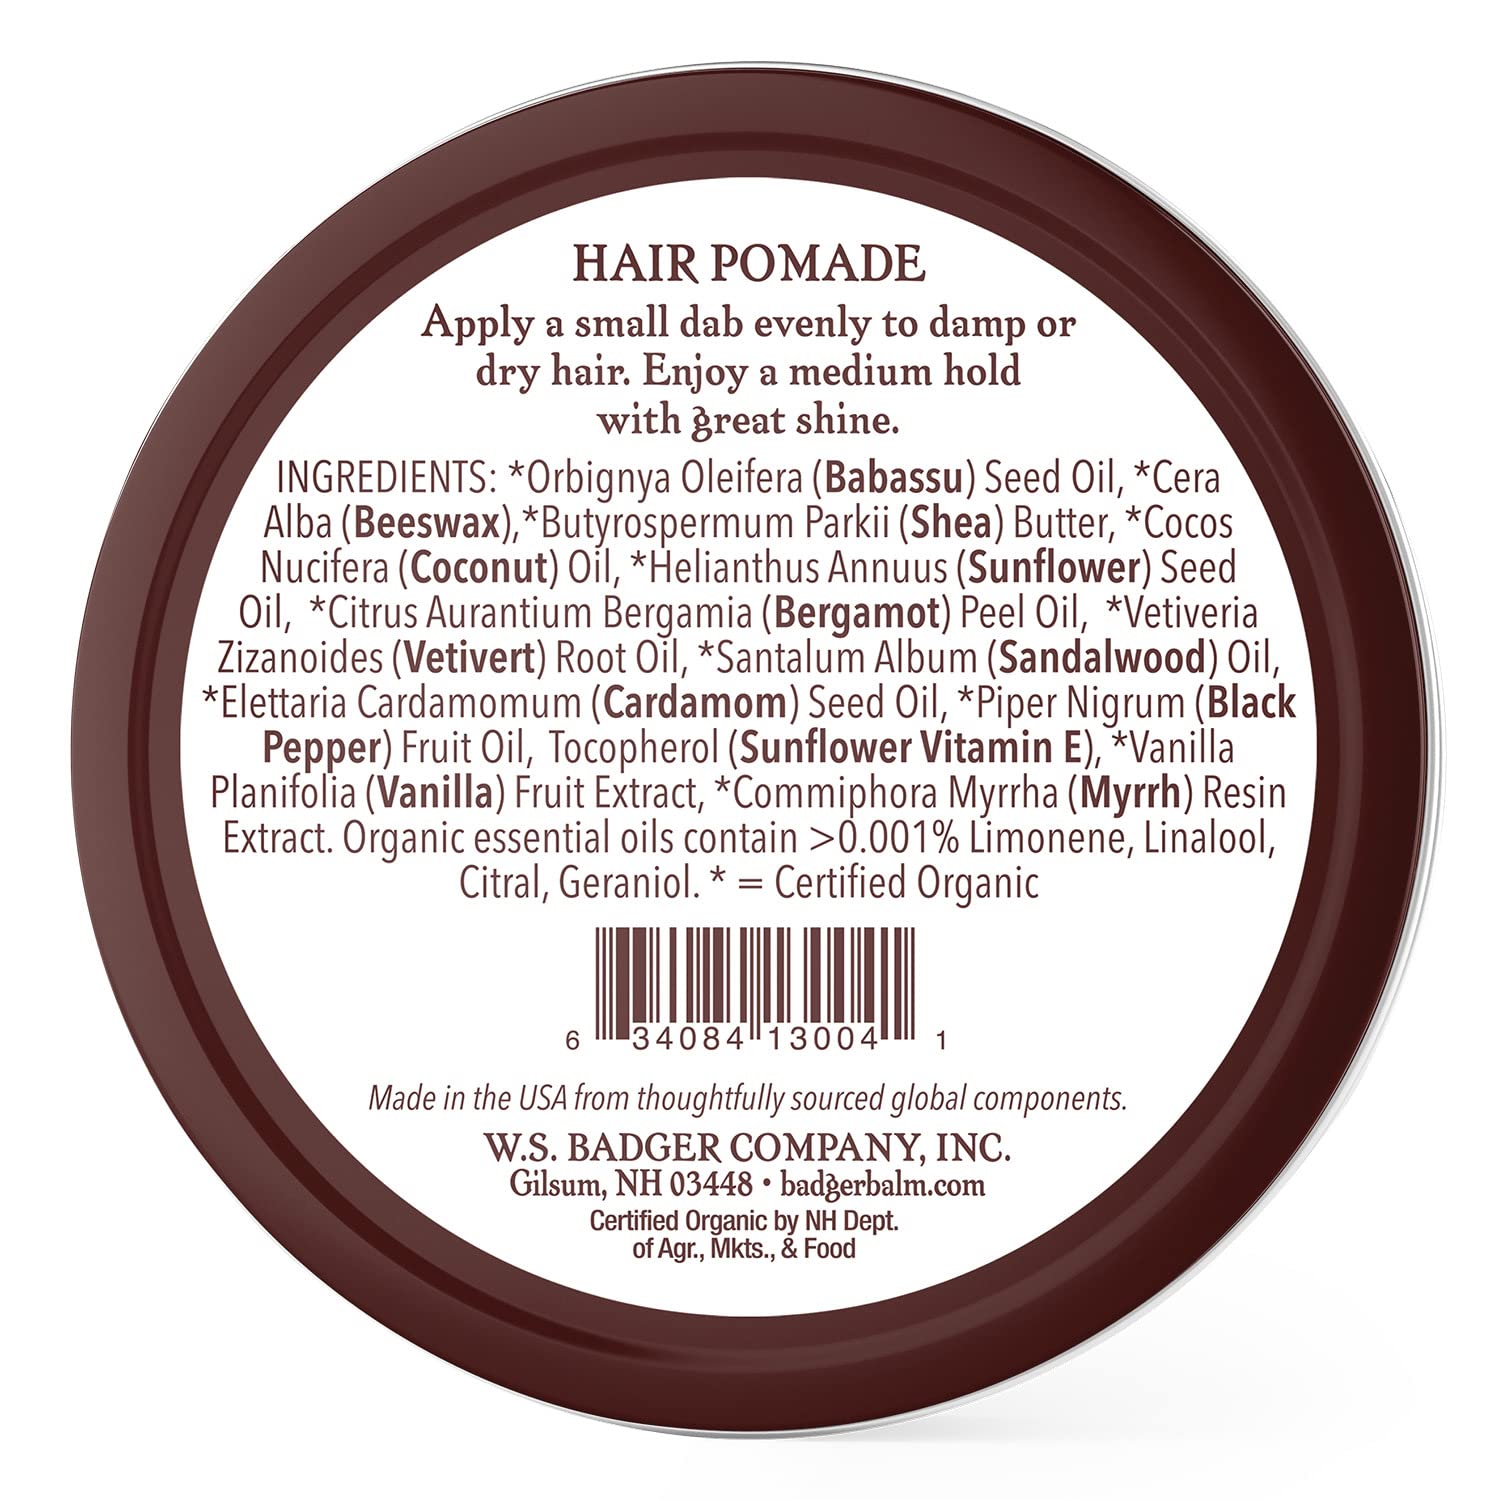 Badger - Hair Pomade, Certified Organic, Medium Hold Hair Pomade with Great Shine, Essential Oils, Mens Hair Pomade, 2oz